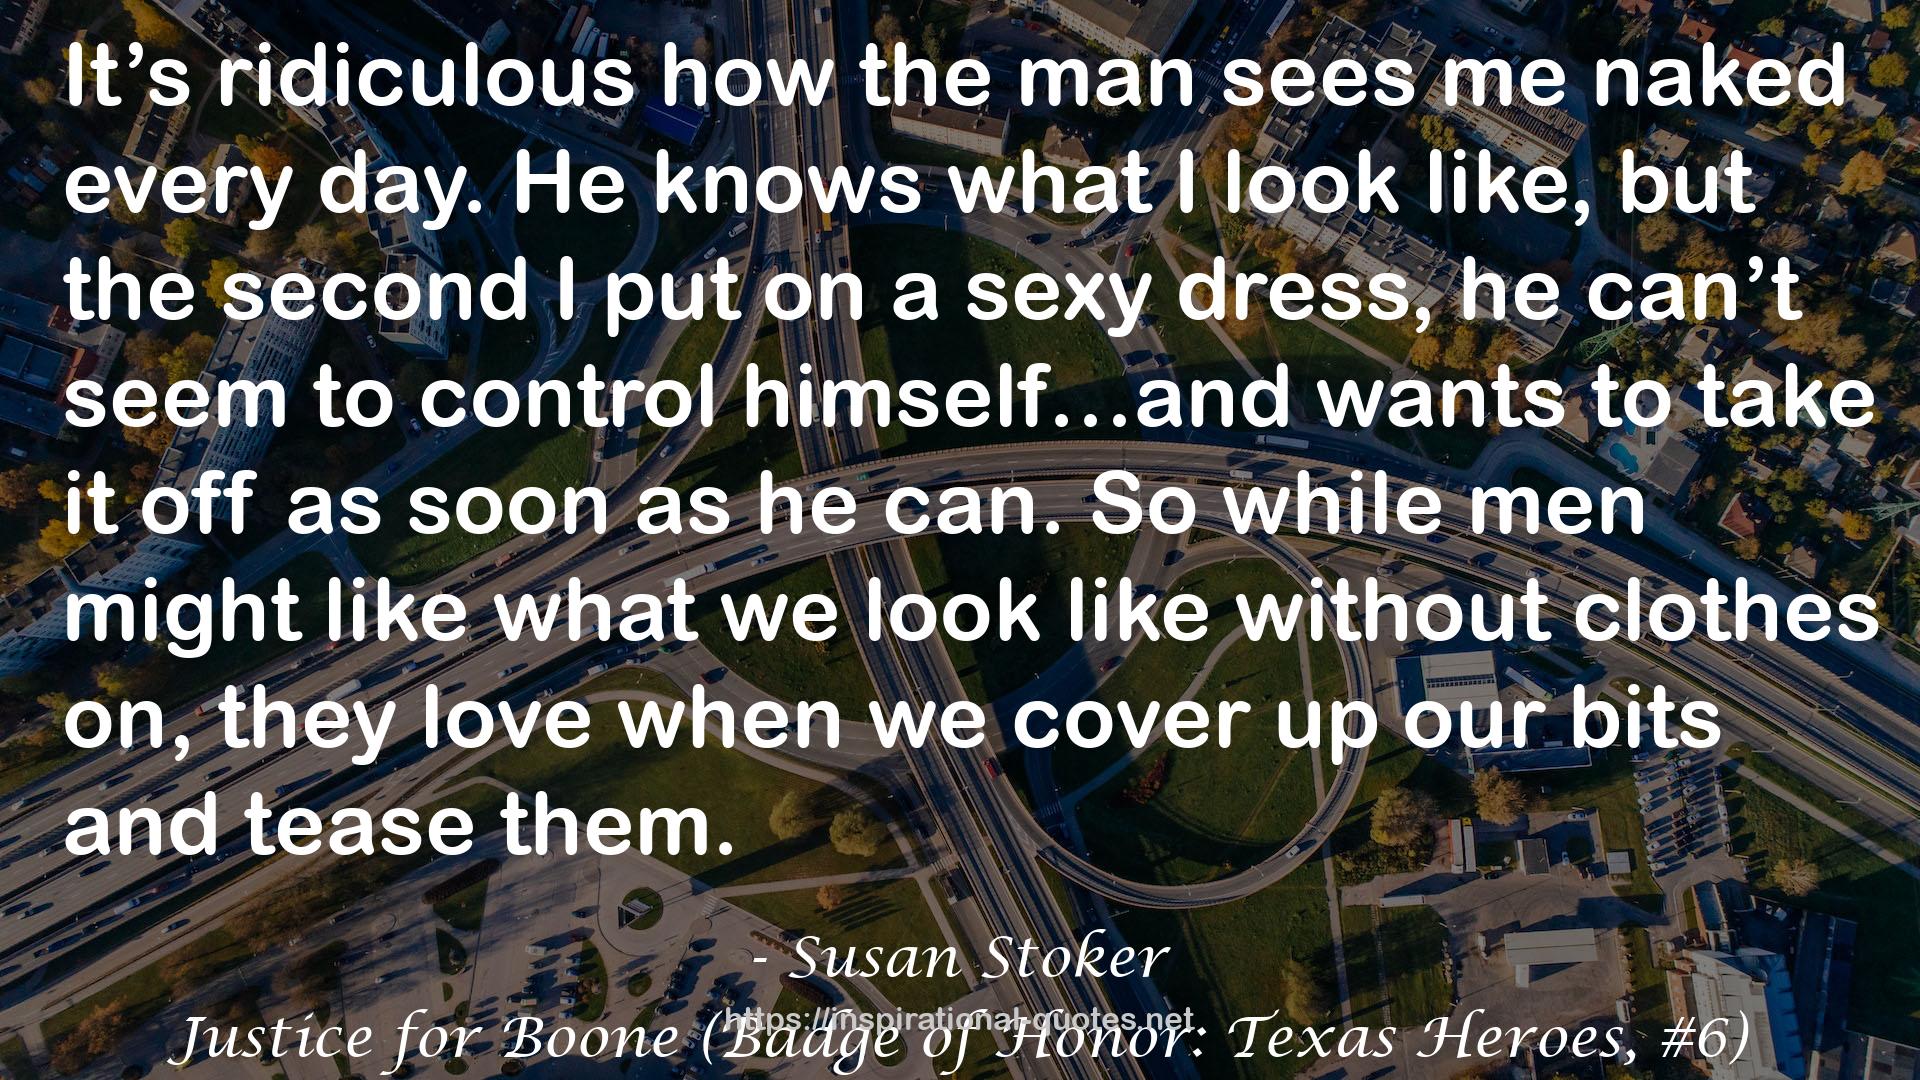 Justice for Boone (Badge of Honor: Texas Heroes, #6) QUOTES